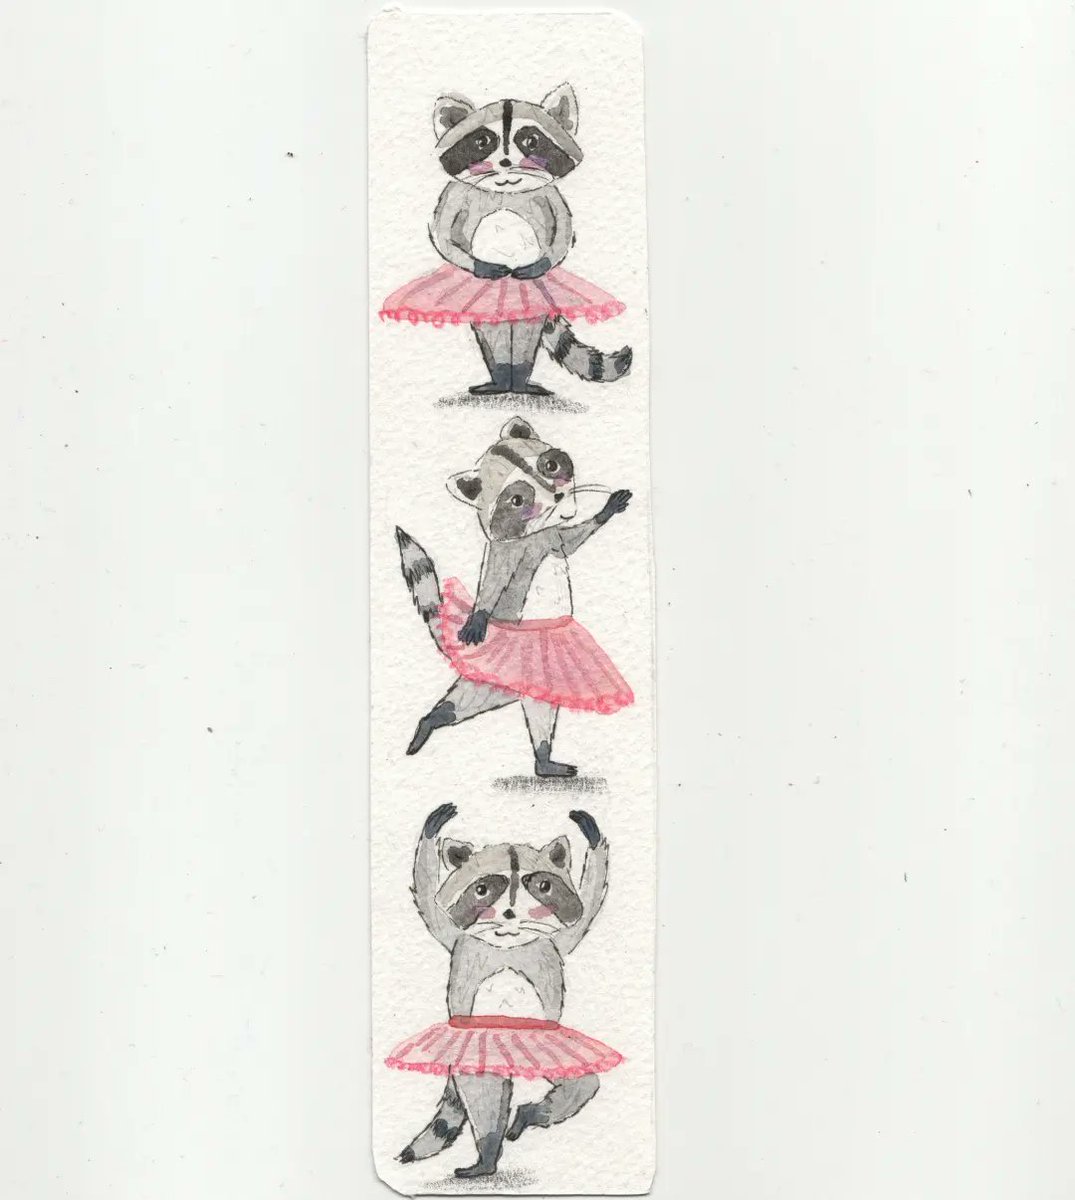 My second #bookmarkproject bookmark of a raccoon doing ballet